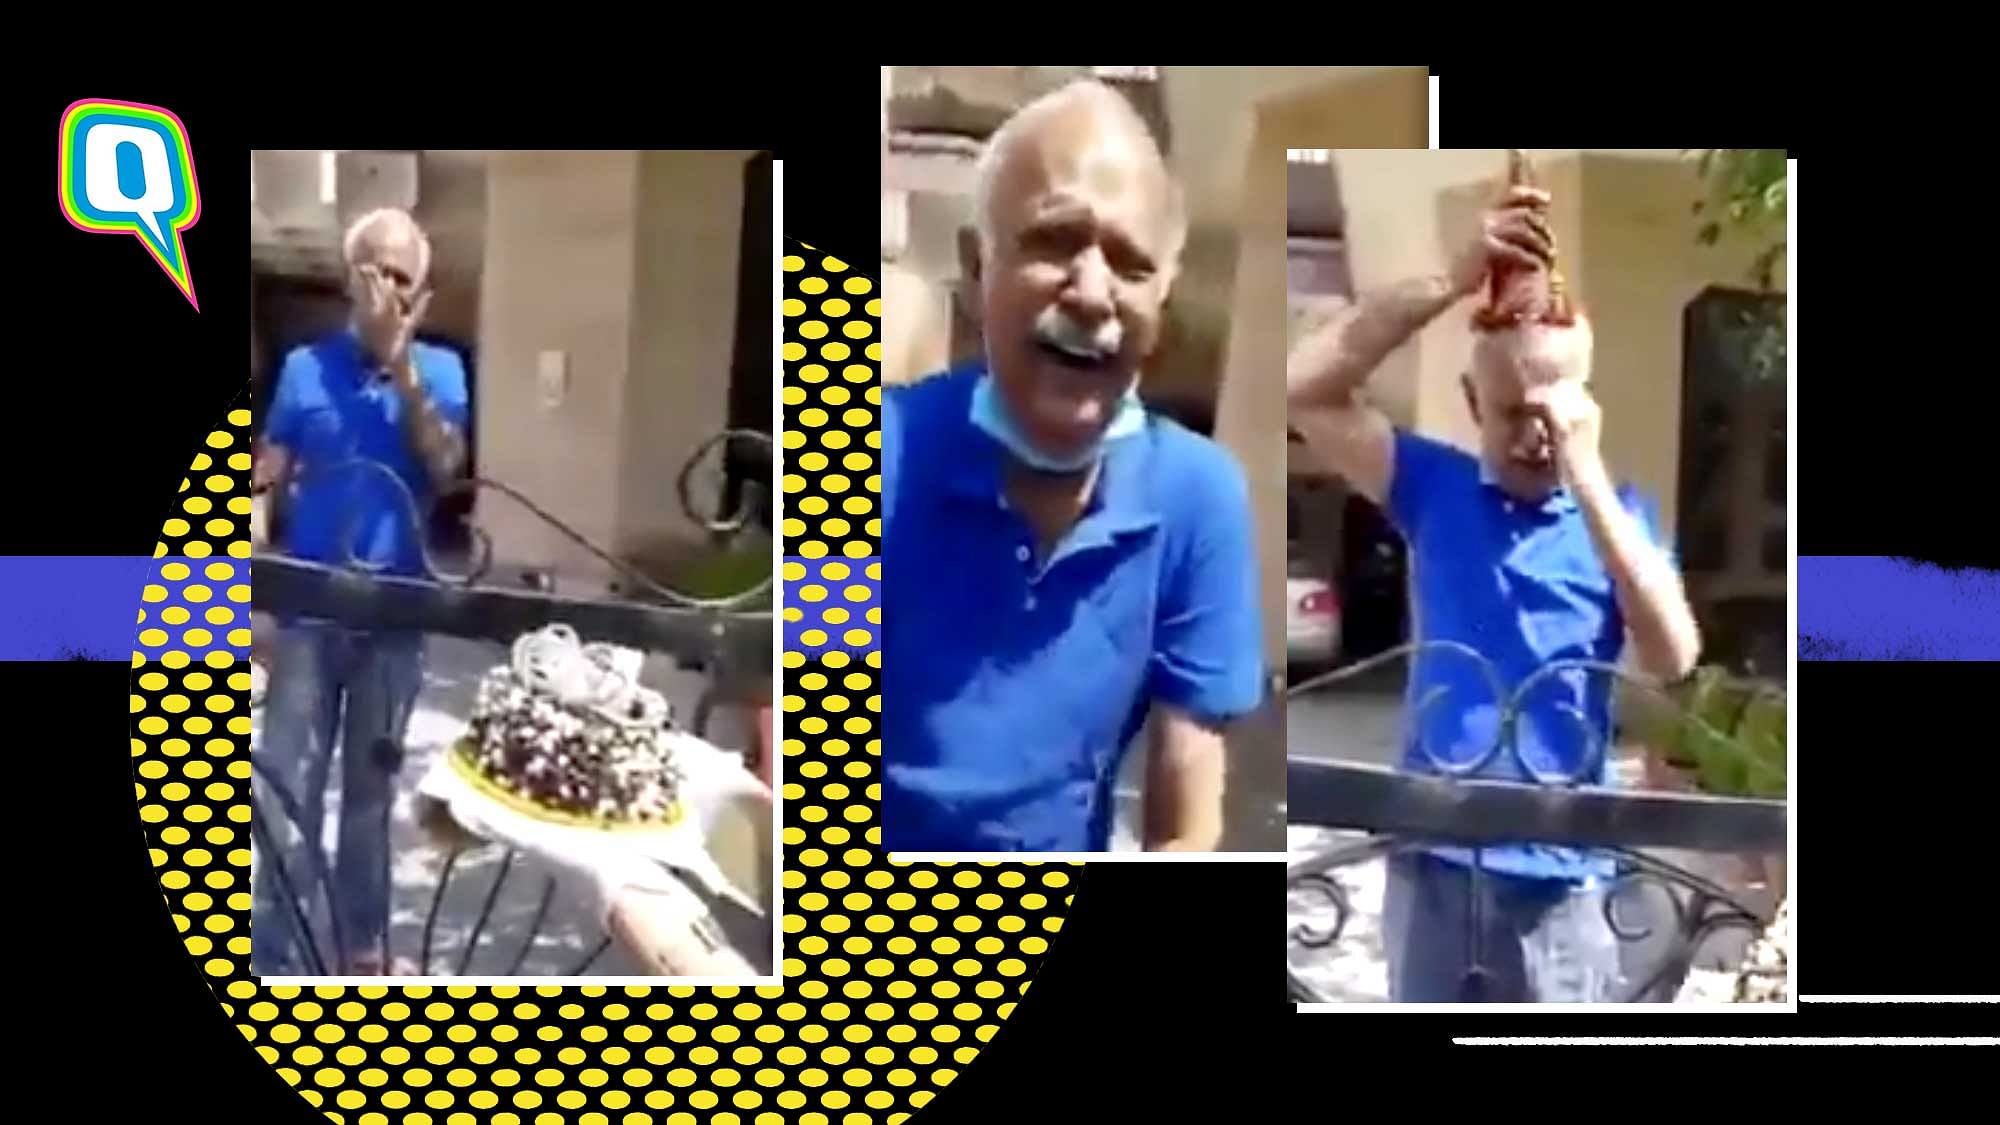 A senior citizen is surprised on his birthday